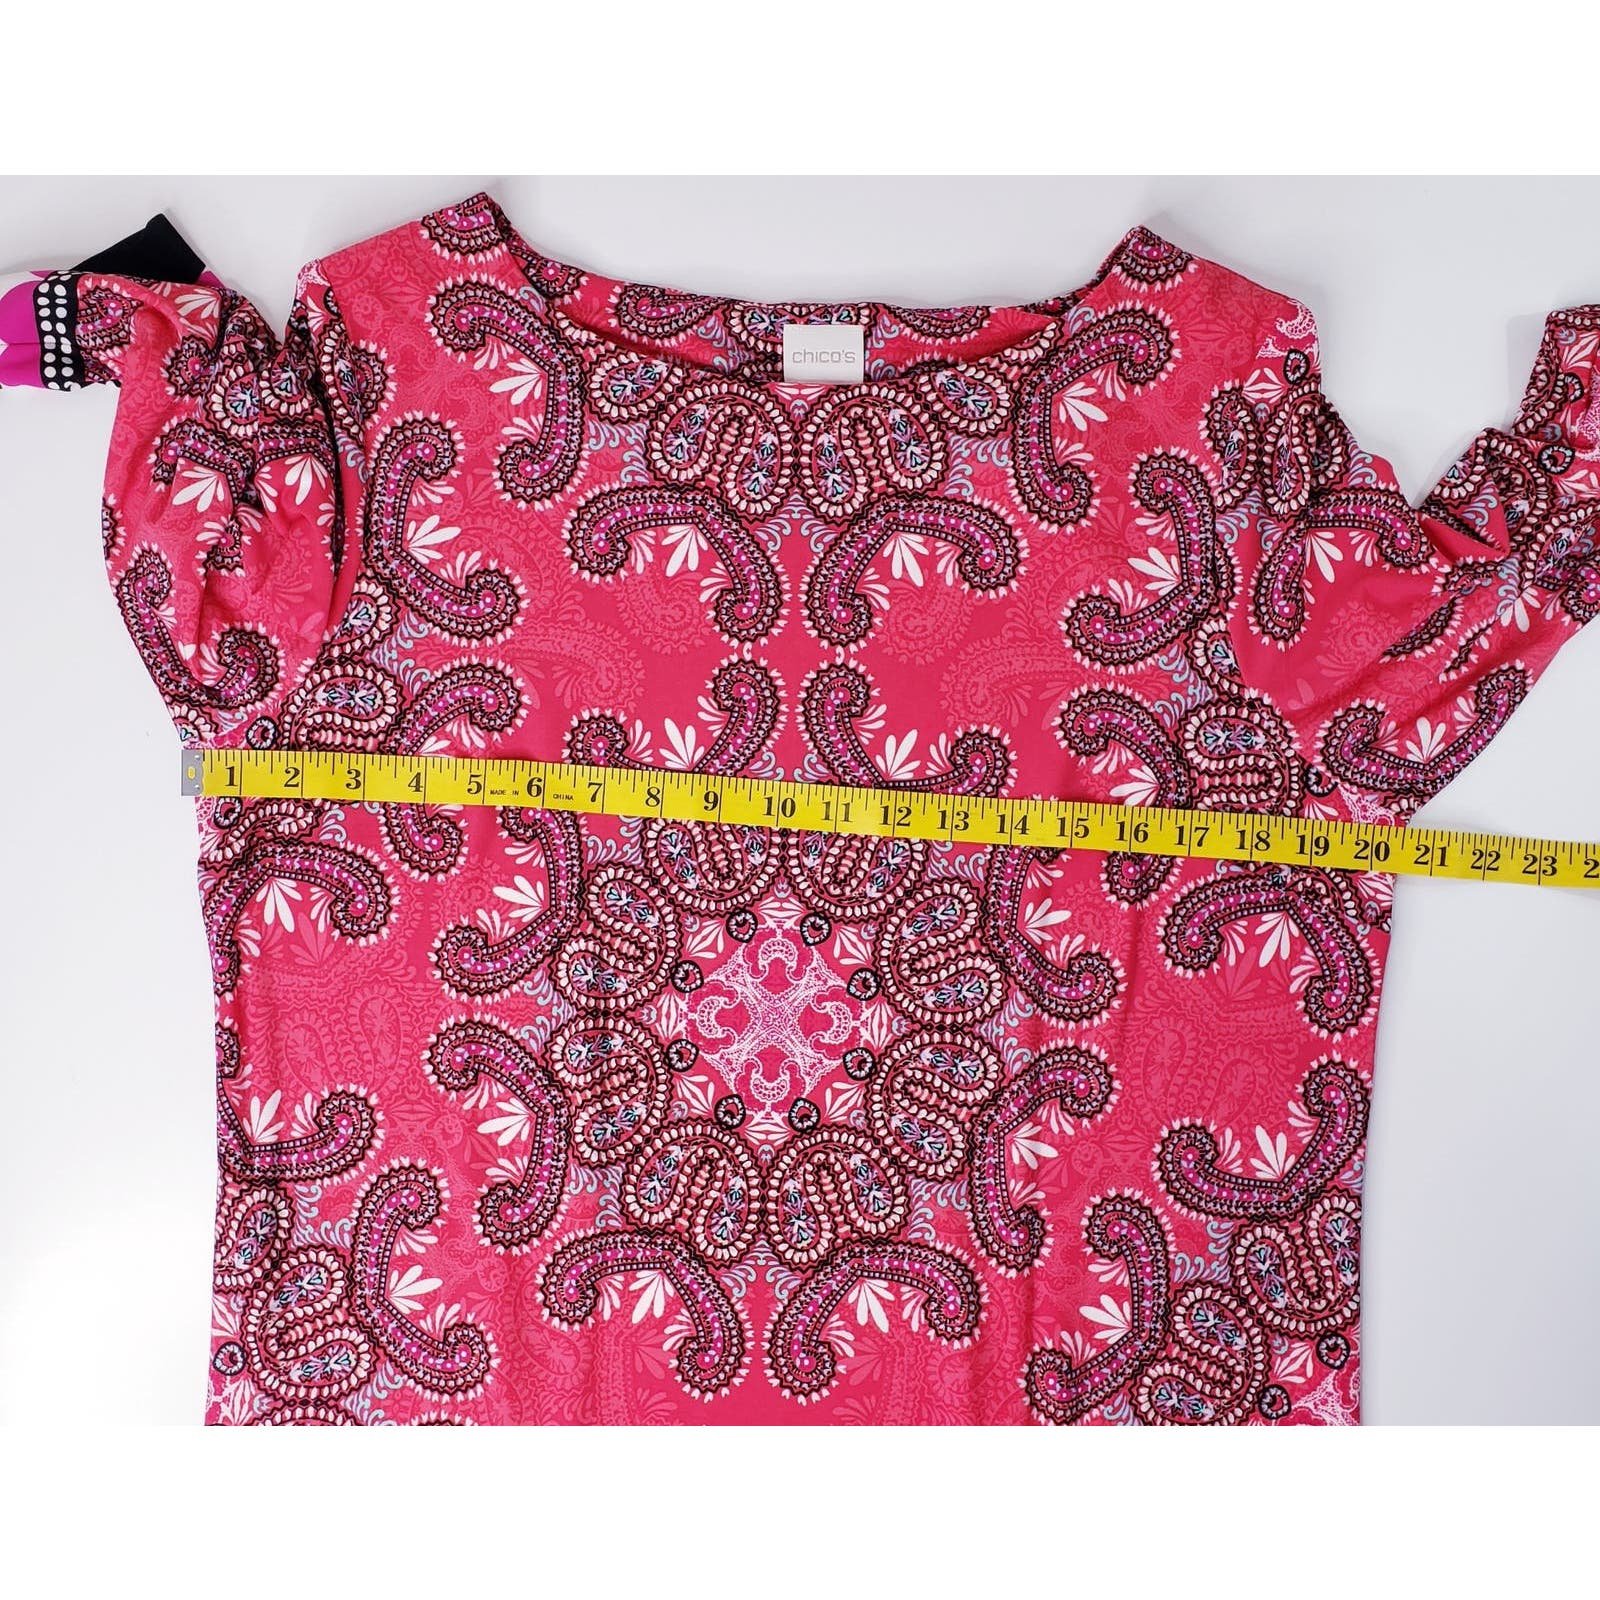 Buy CHICOS Women´s Size 2 Red & Black 3/4 Sleeve Paisley Shift Dress in VGUC PDyd8ZRse Online Exclusive